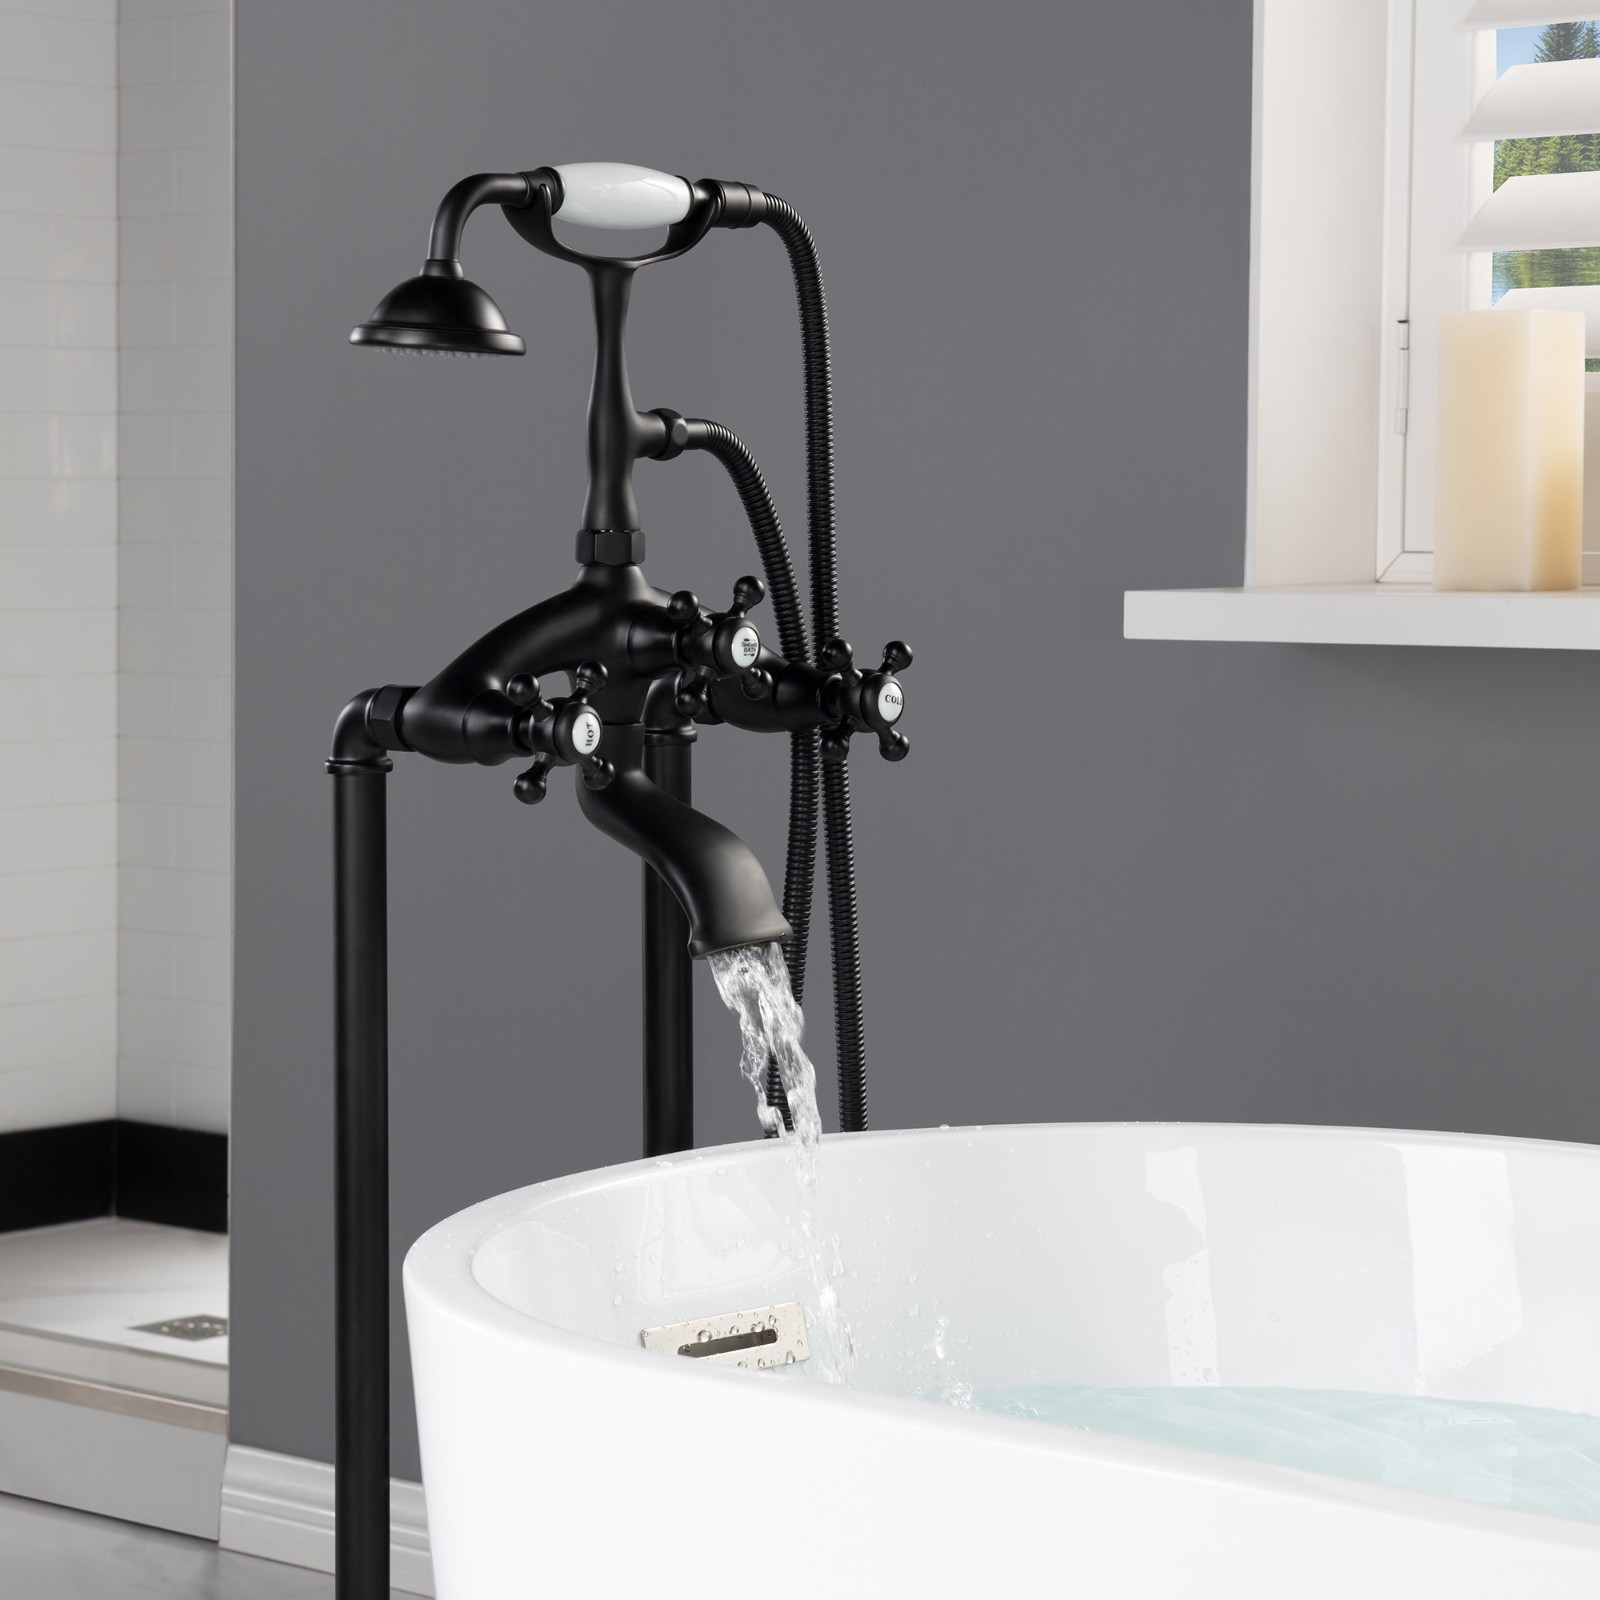  WOODBRIDGE F0020MB Freestanding Clawfoot Tub Filler Faucet with Hand Shower and Hose in Matte Black_5398